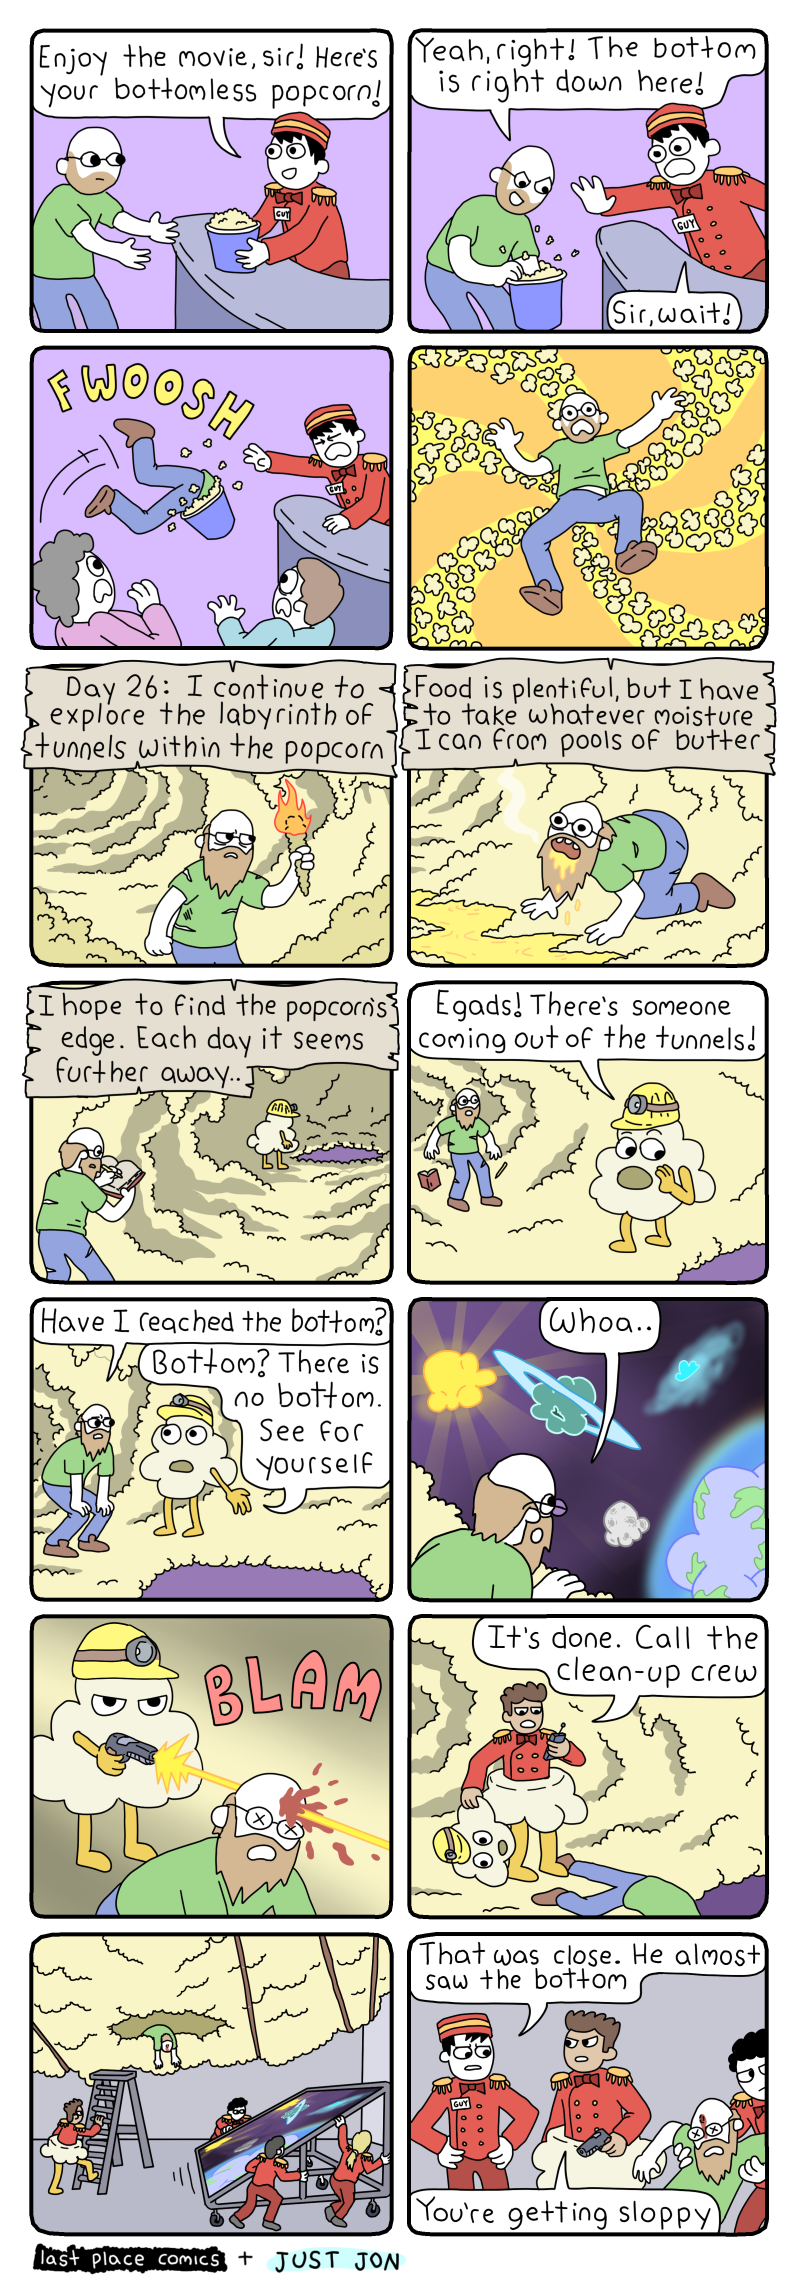 comic, webcomic, last place comic, just jon, popcorn, bottomless, tunnels, cave, popcorn man, movie theater, movie theatre, space, cosmos, shot in the head, gun, butter